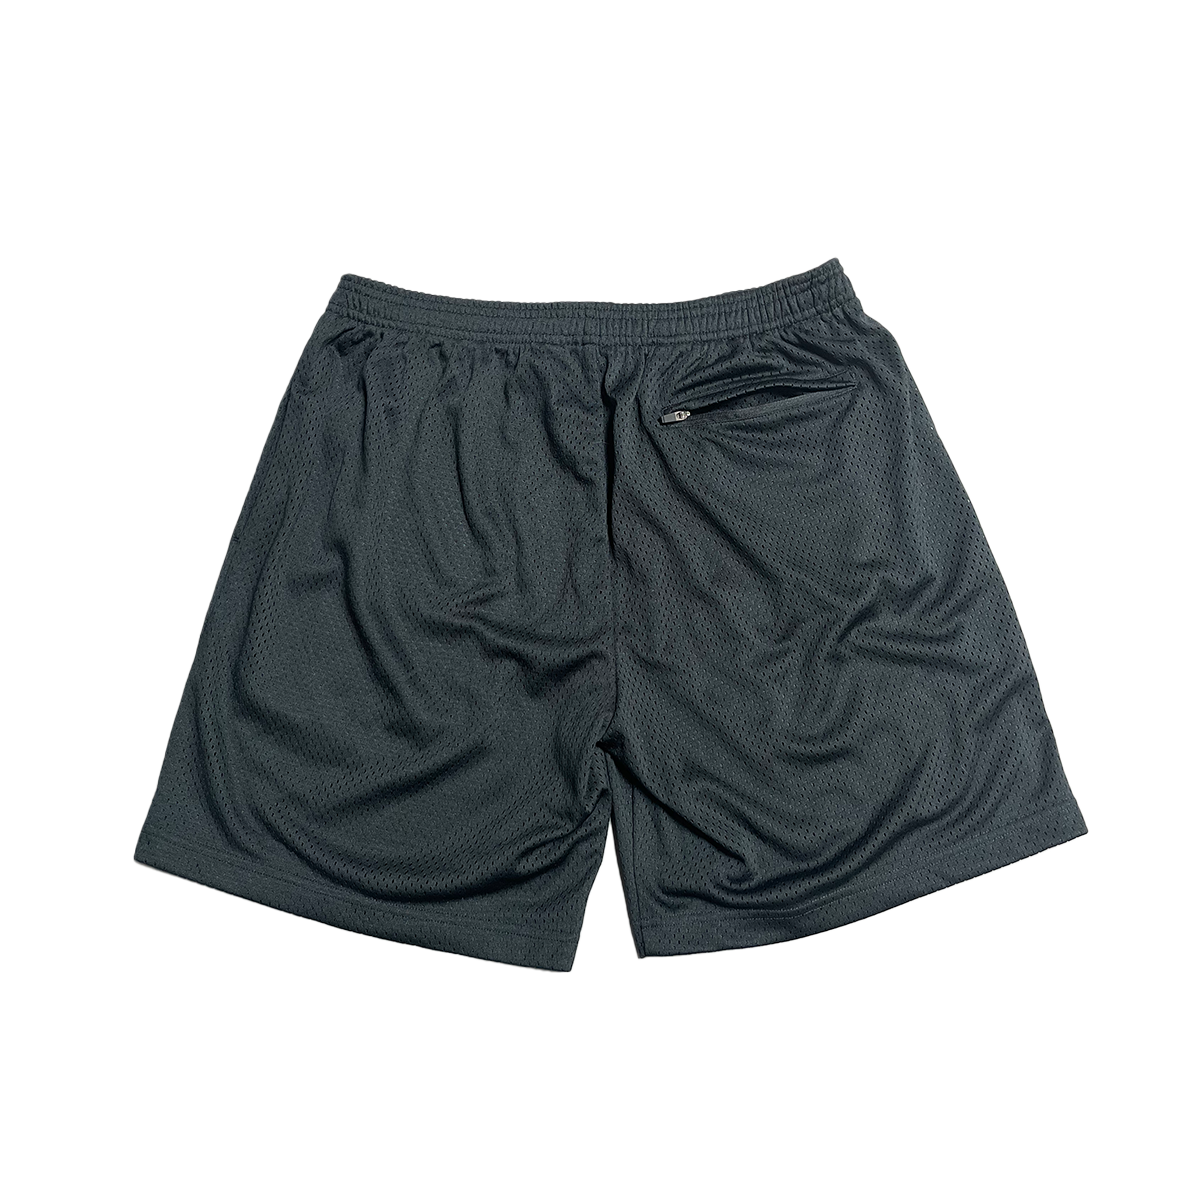 3M Mesh Shorts Blk(size options listed)